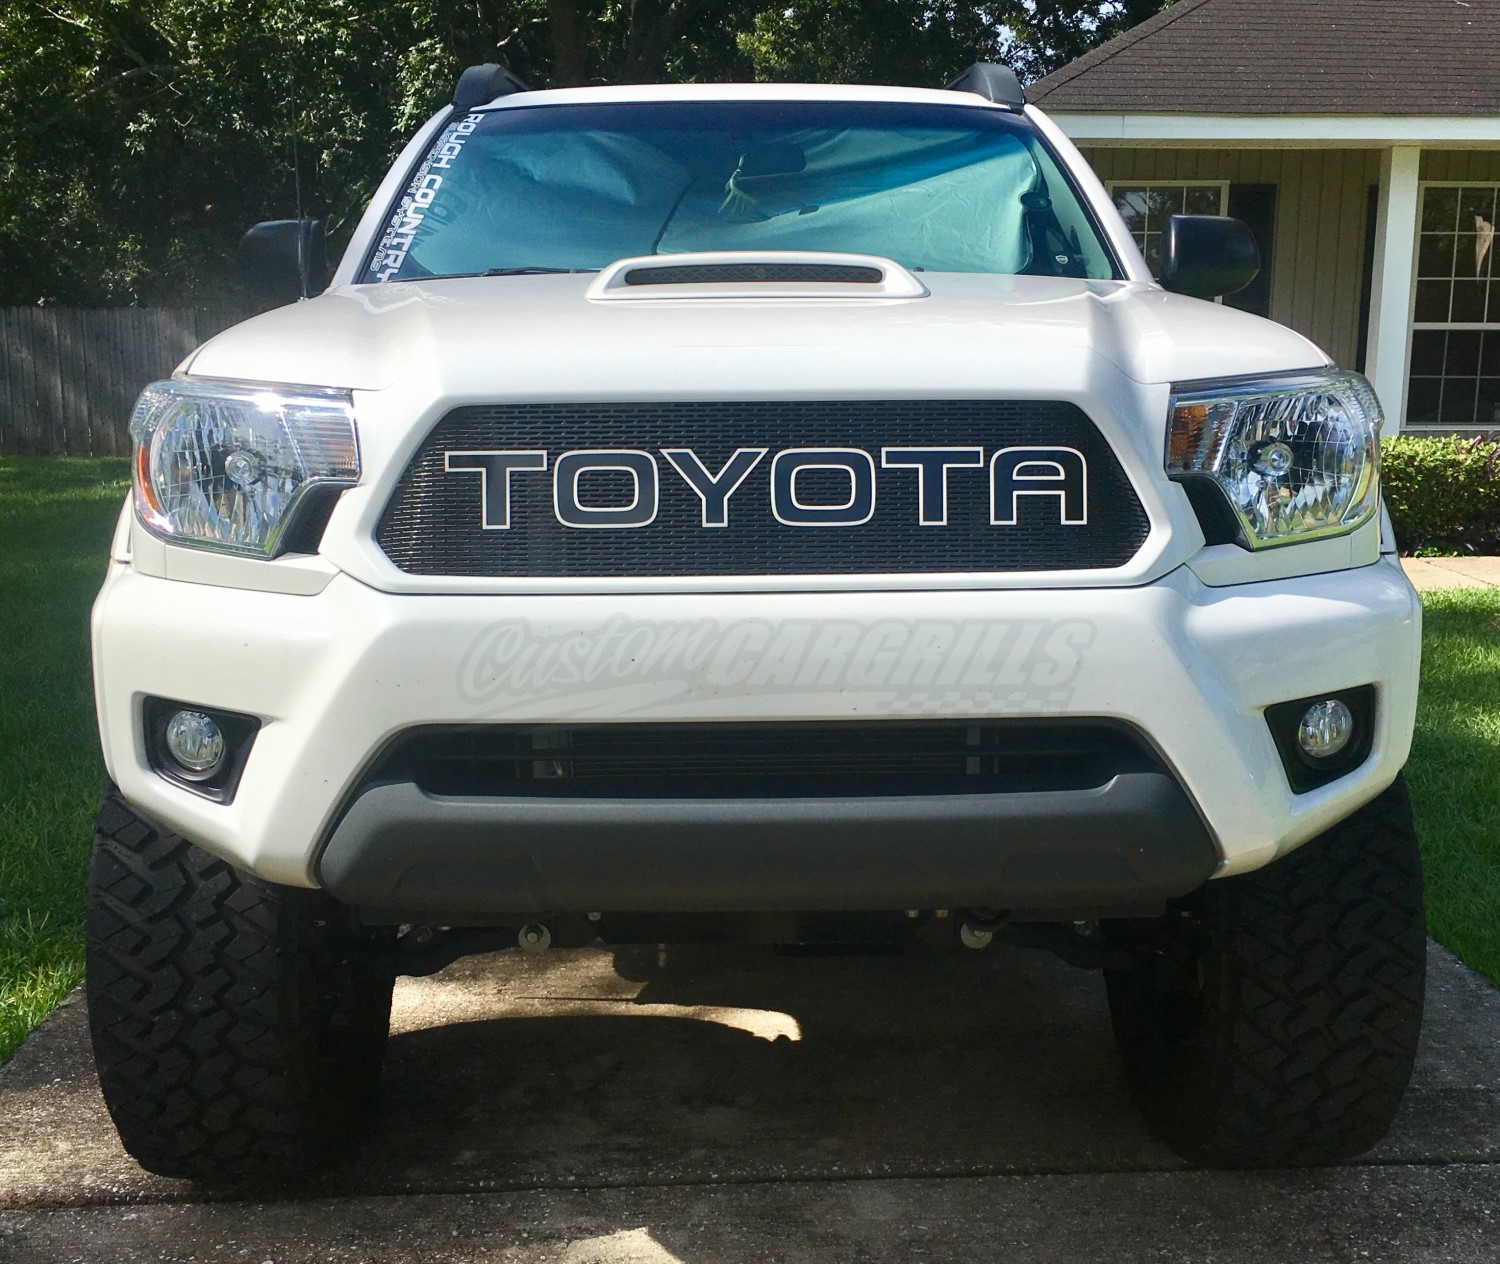 2012 - 2015 Toyota Tacoma Grill Mesh Builder #2